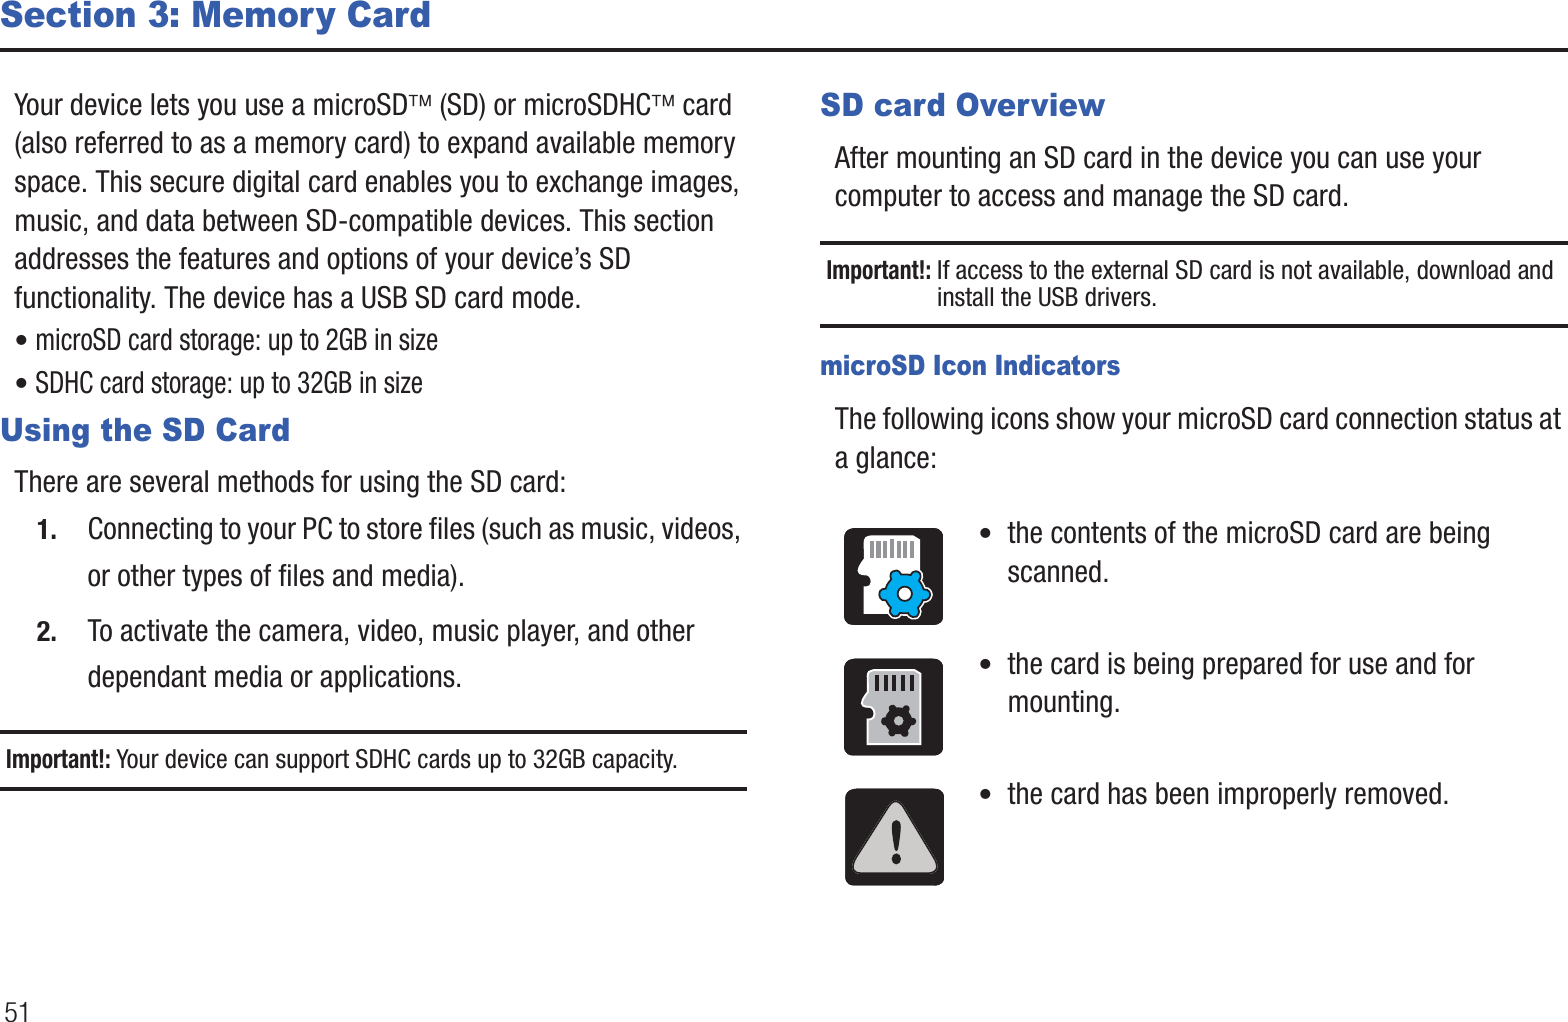 51Section 3: Memory CardYour device lets you use a microSD¥ (SD) or microSDHC¥ card (also referred to as a memory card) to expand available memory space. This secure digital card enables you to exchange images, music, and data between SD-compatible devices. This section addresses the features and options of your device’s SD functionality. The device has a USB SD card mode.• microSD card storage: up to 2GB in size• SDHC card storage: up to 32GB in sizeUsing the SD CardThere are several methods for using the SD card:1. Connecting to your PC to store files (such as music, videos, or other types of files and media).2. To activate the camera, video, music player, and other dependant media or applications.Important!: Your device can support SDHC cards up to 32GB capacity.SD card OverviewAfter mounting an SD card in the device you can use your computer to access and manage the SD card.Important!: If access to the external SD card is not available, download and install the USB drivers.microSD Icon IndicatorsThe following icons show your microSD card connection status at a glance:•  the contents of the microSD card are being scanned.•  the card is being prepared for use and for mounting.•  the card has been improperly removed.